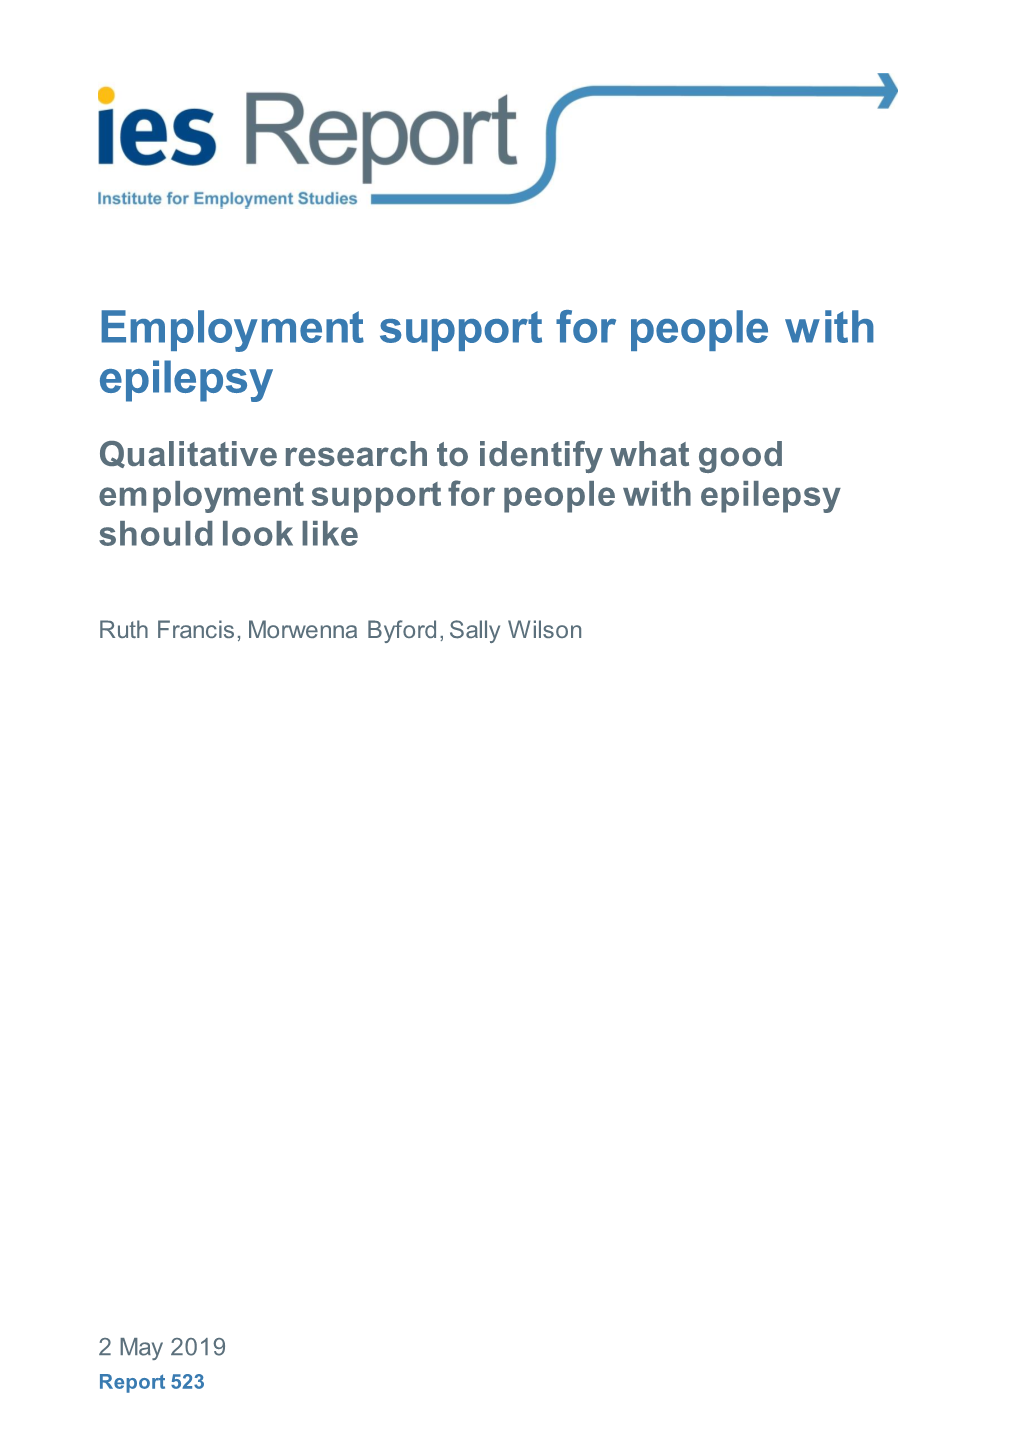 Employment Support for People with Epilepsy